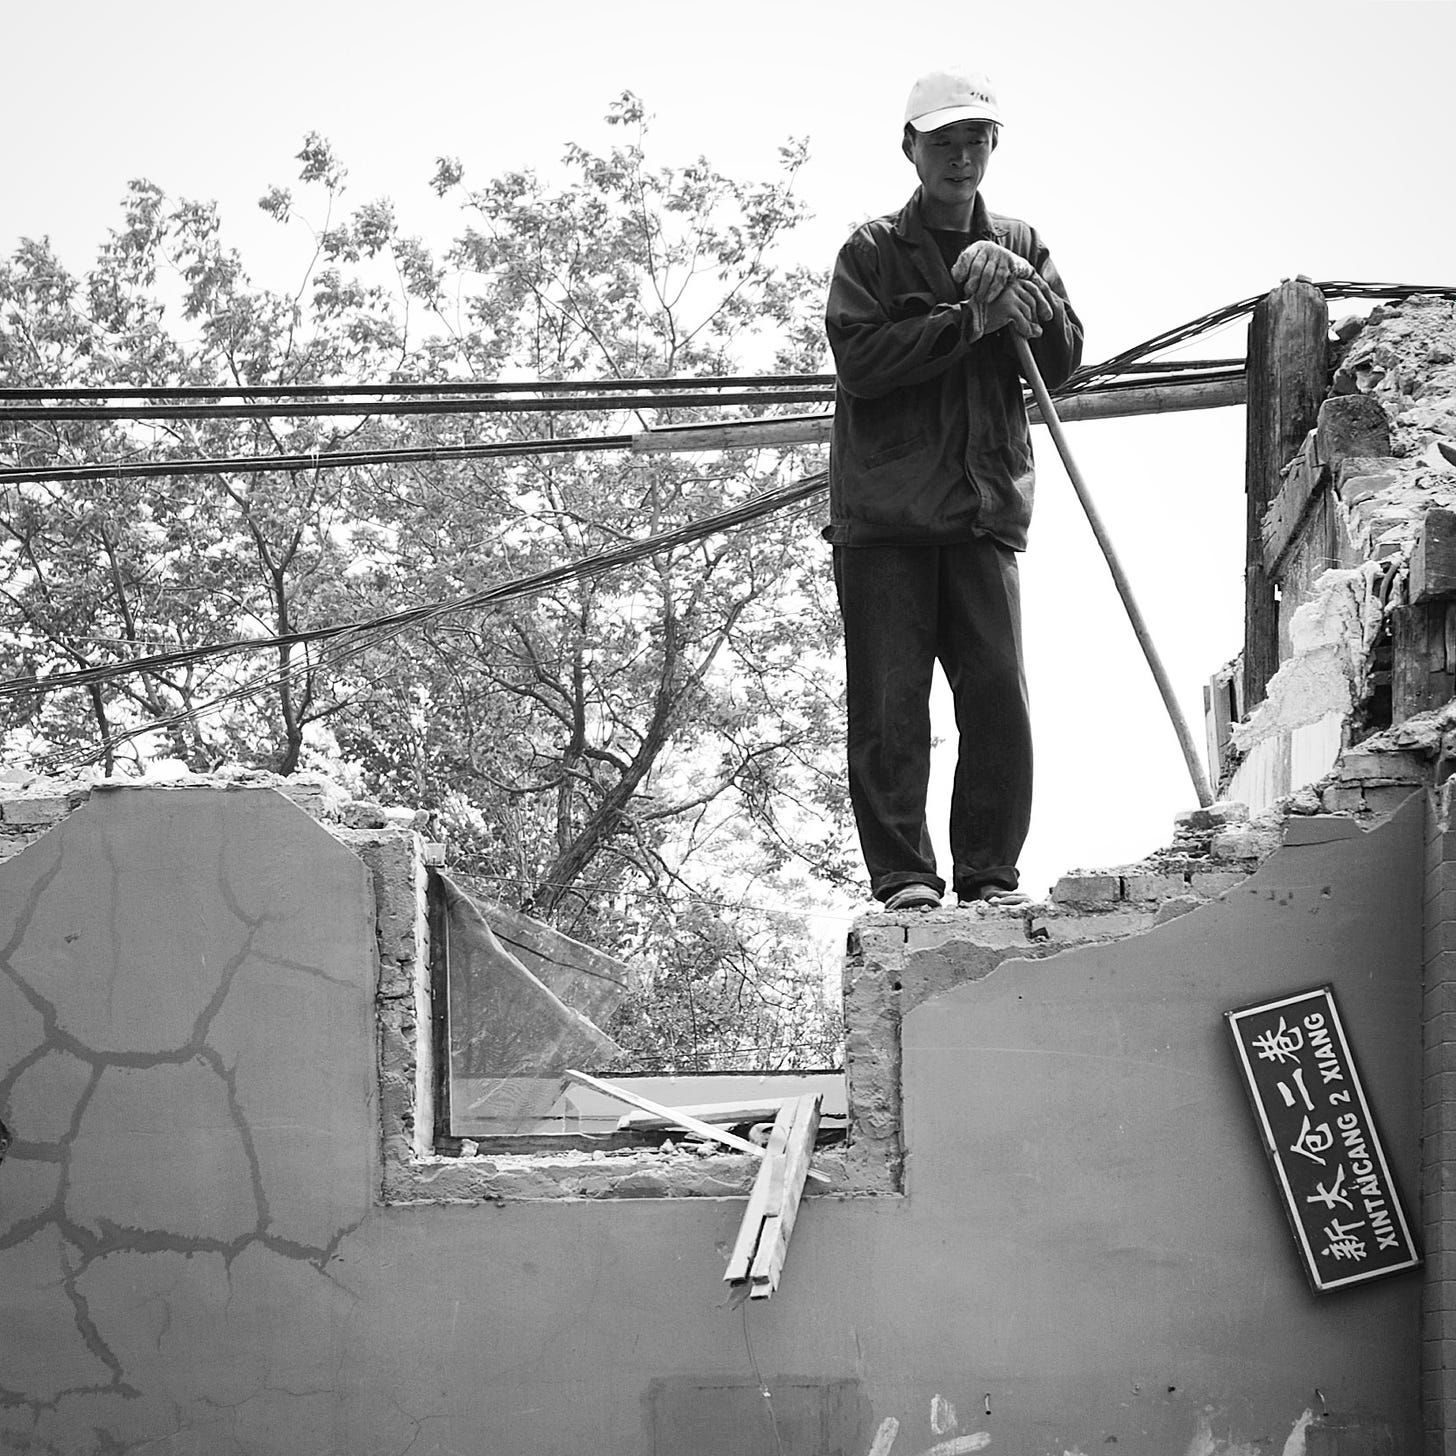 Construction worker in a Beijing hutong